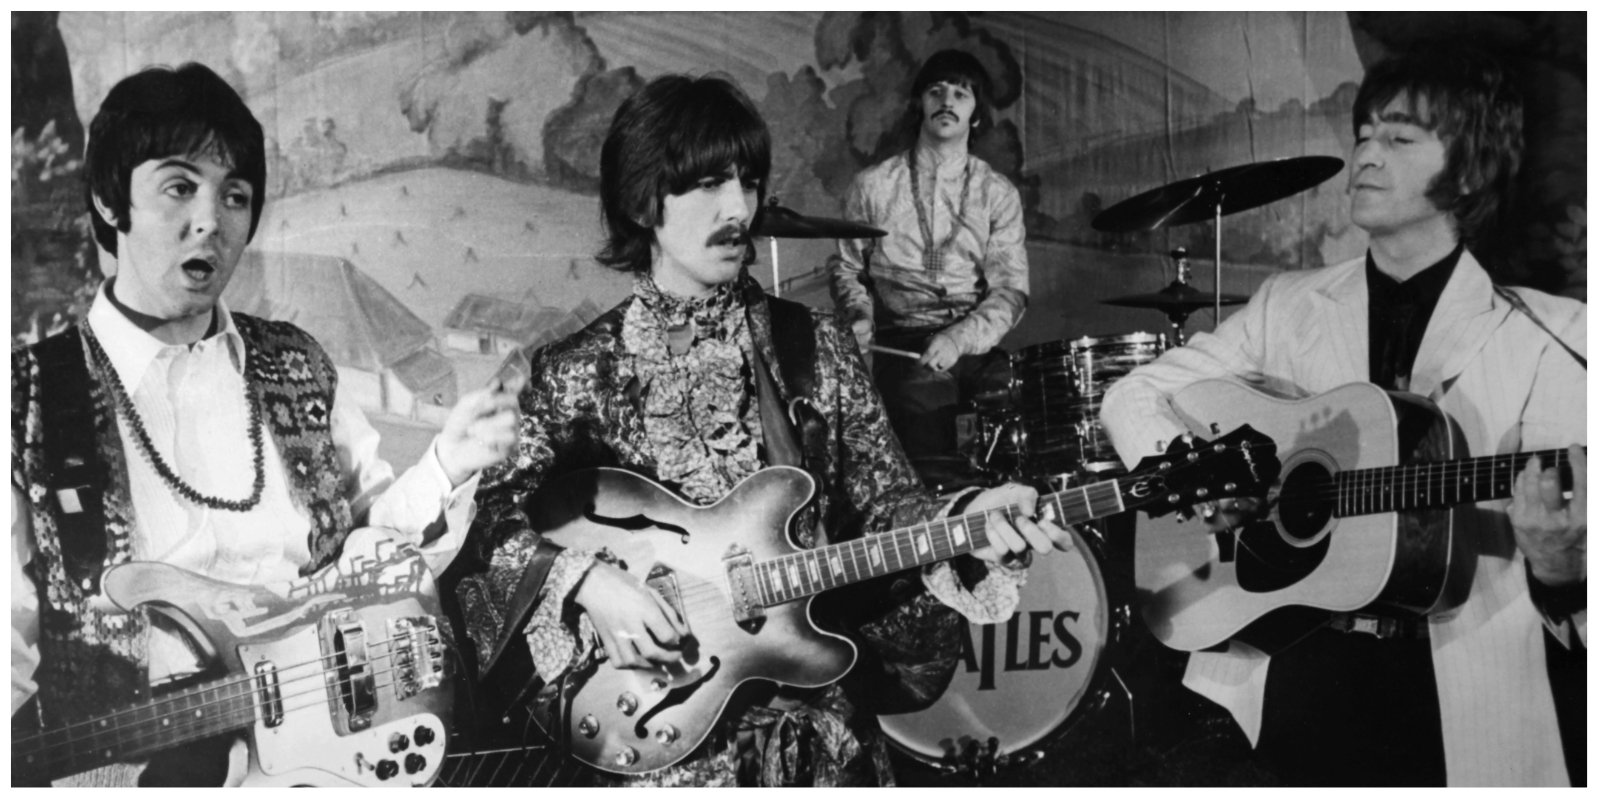 Paul McCartney, George Harrison, Ringo Starr and John Lennon on the stage of the Saville Theatre in 1968 in London, United Kingdom.